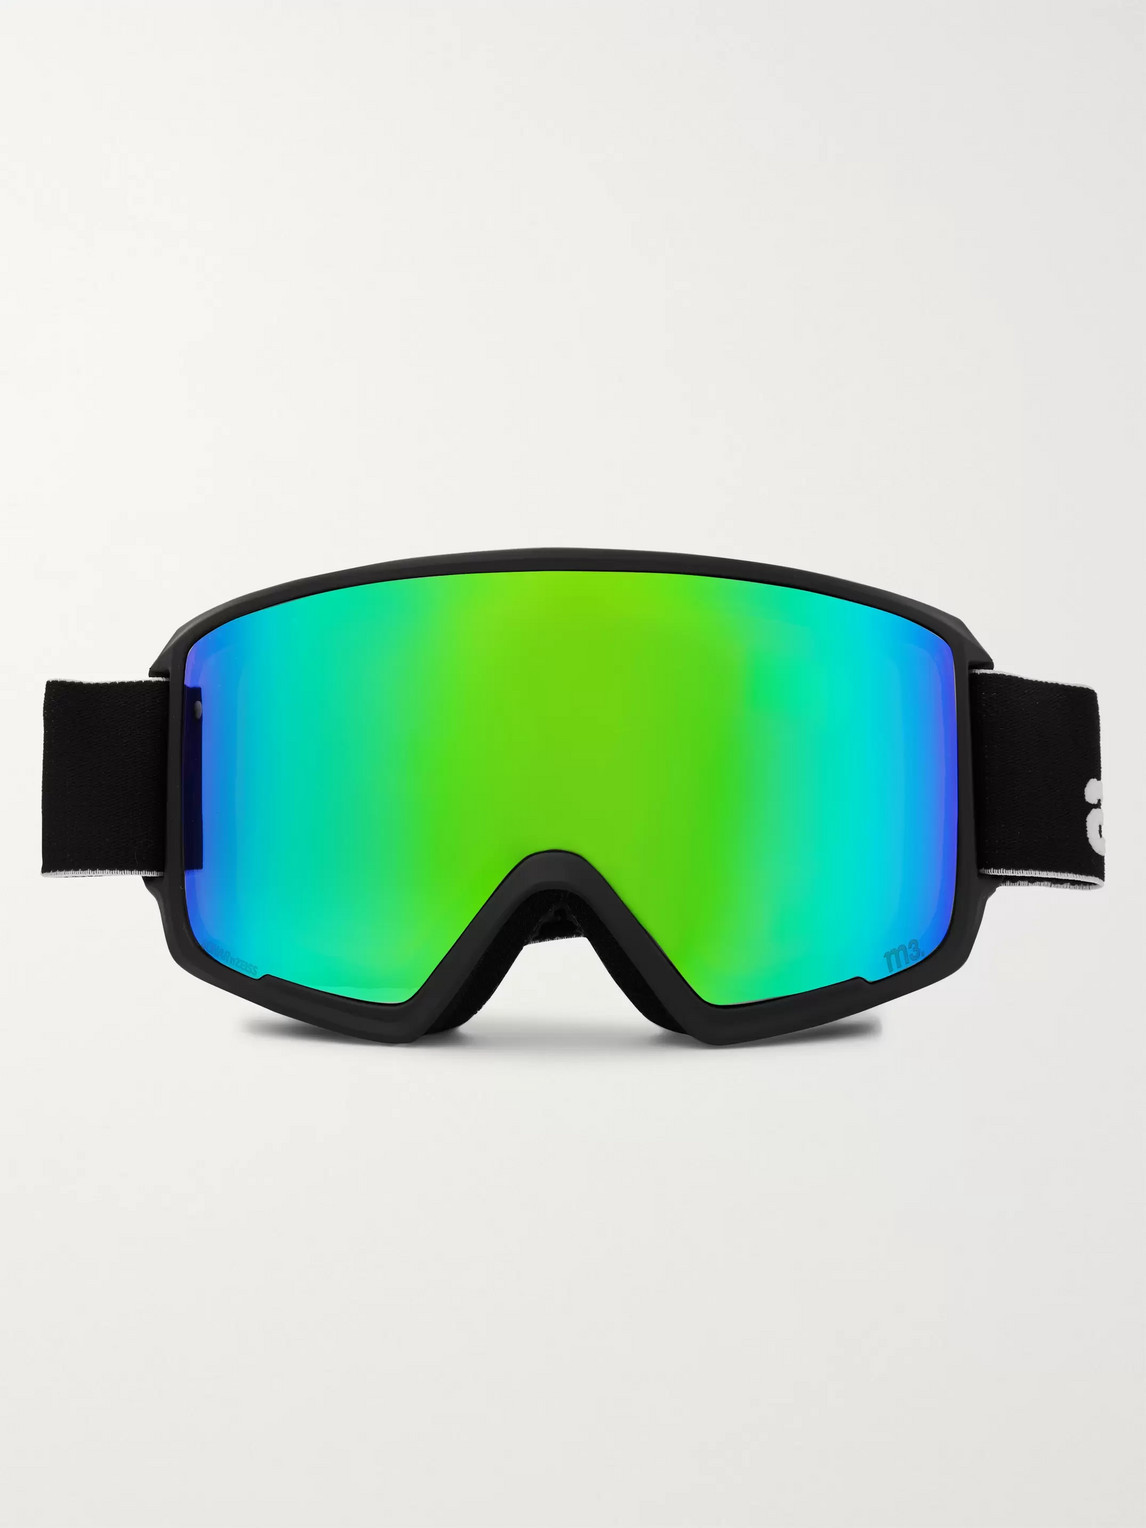 Anon M3 Ski Goggles And Stretch-jersey Face Mask In Black